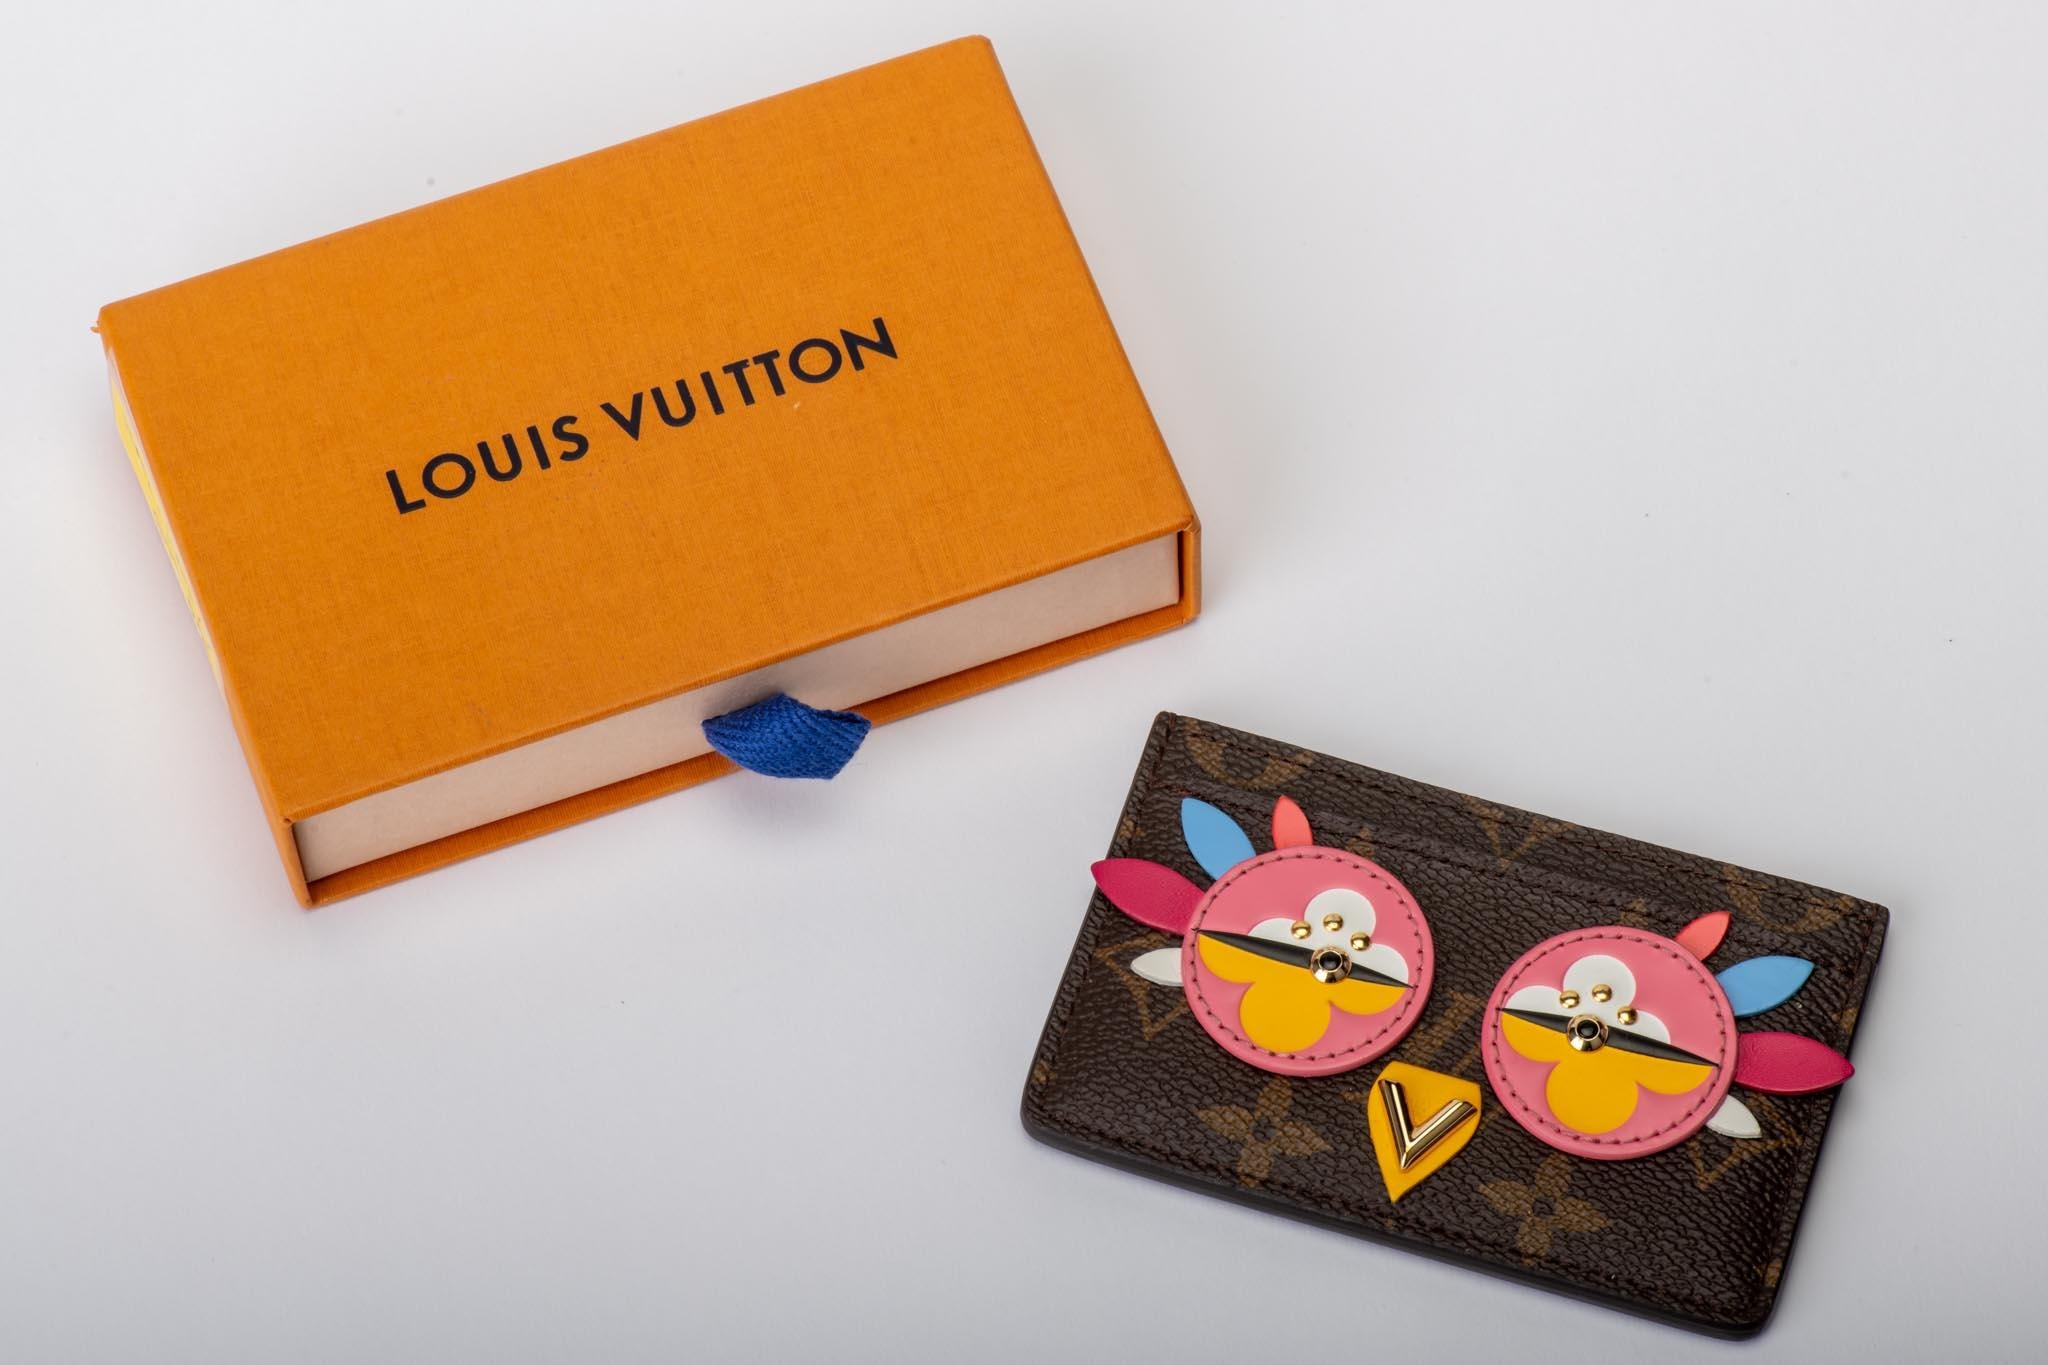 Louis Vuitton limited edition scare crow credit card case. Brand new in original box.